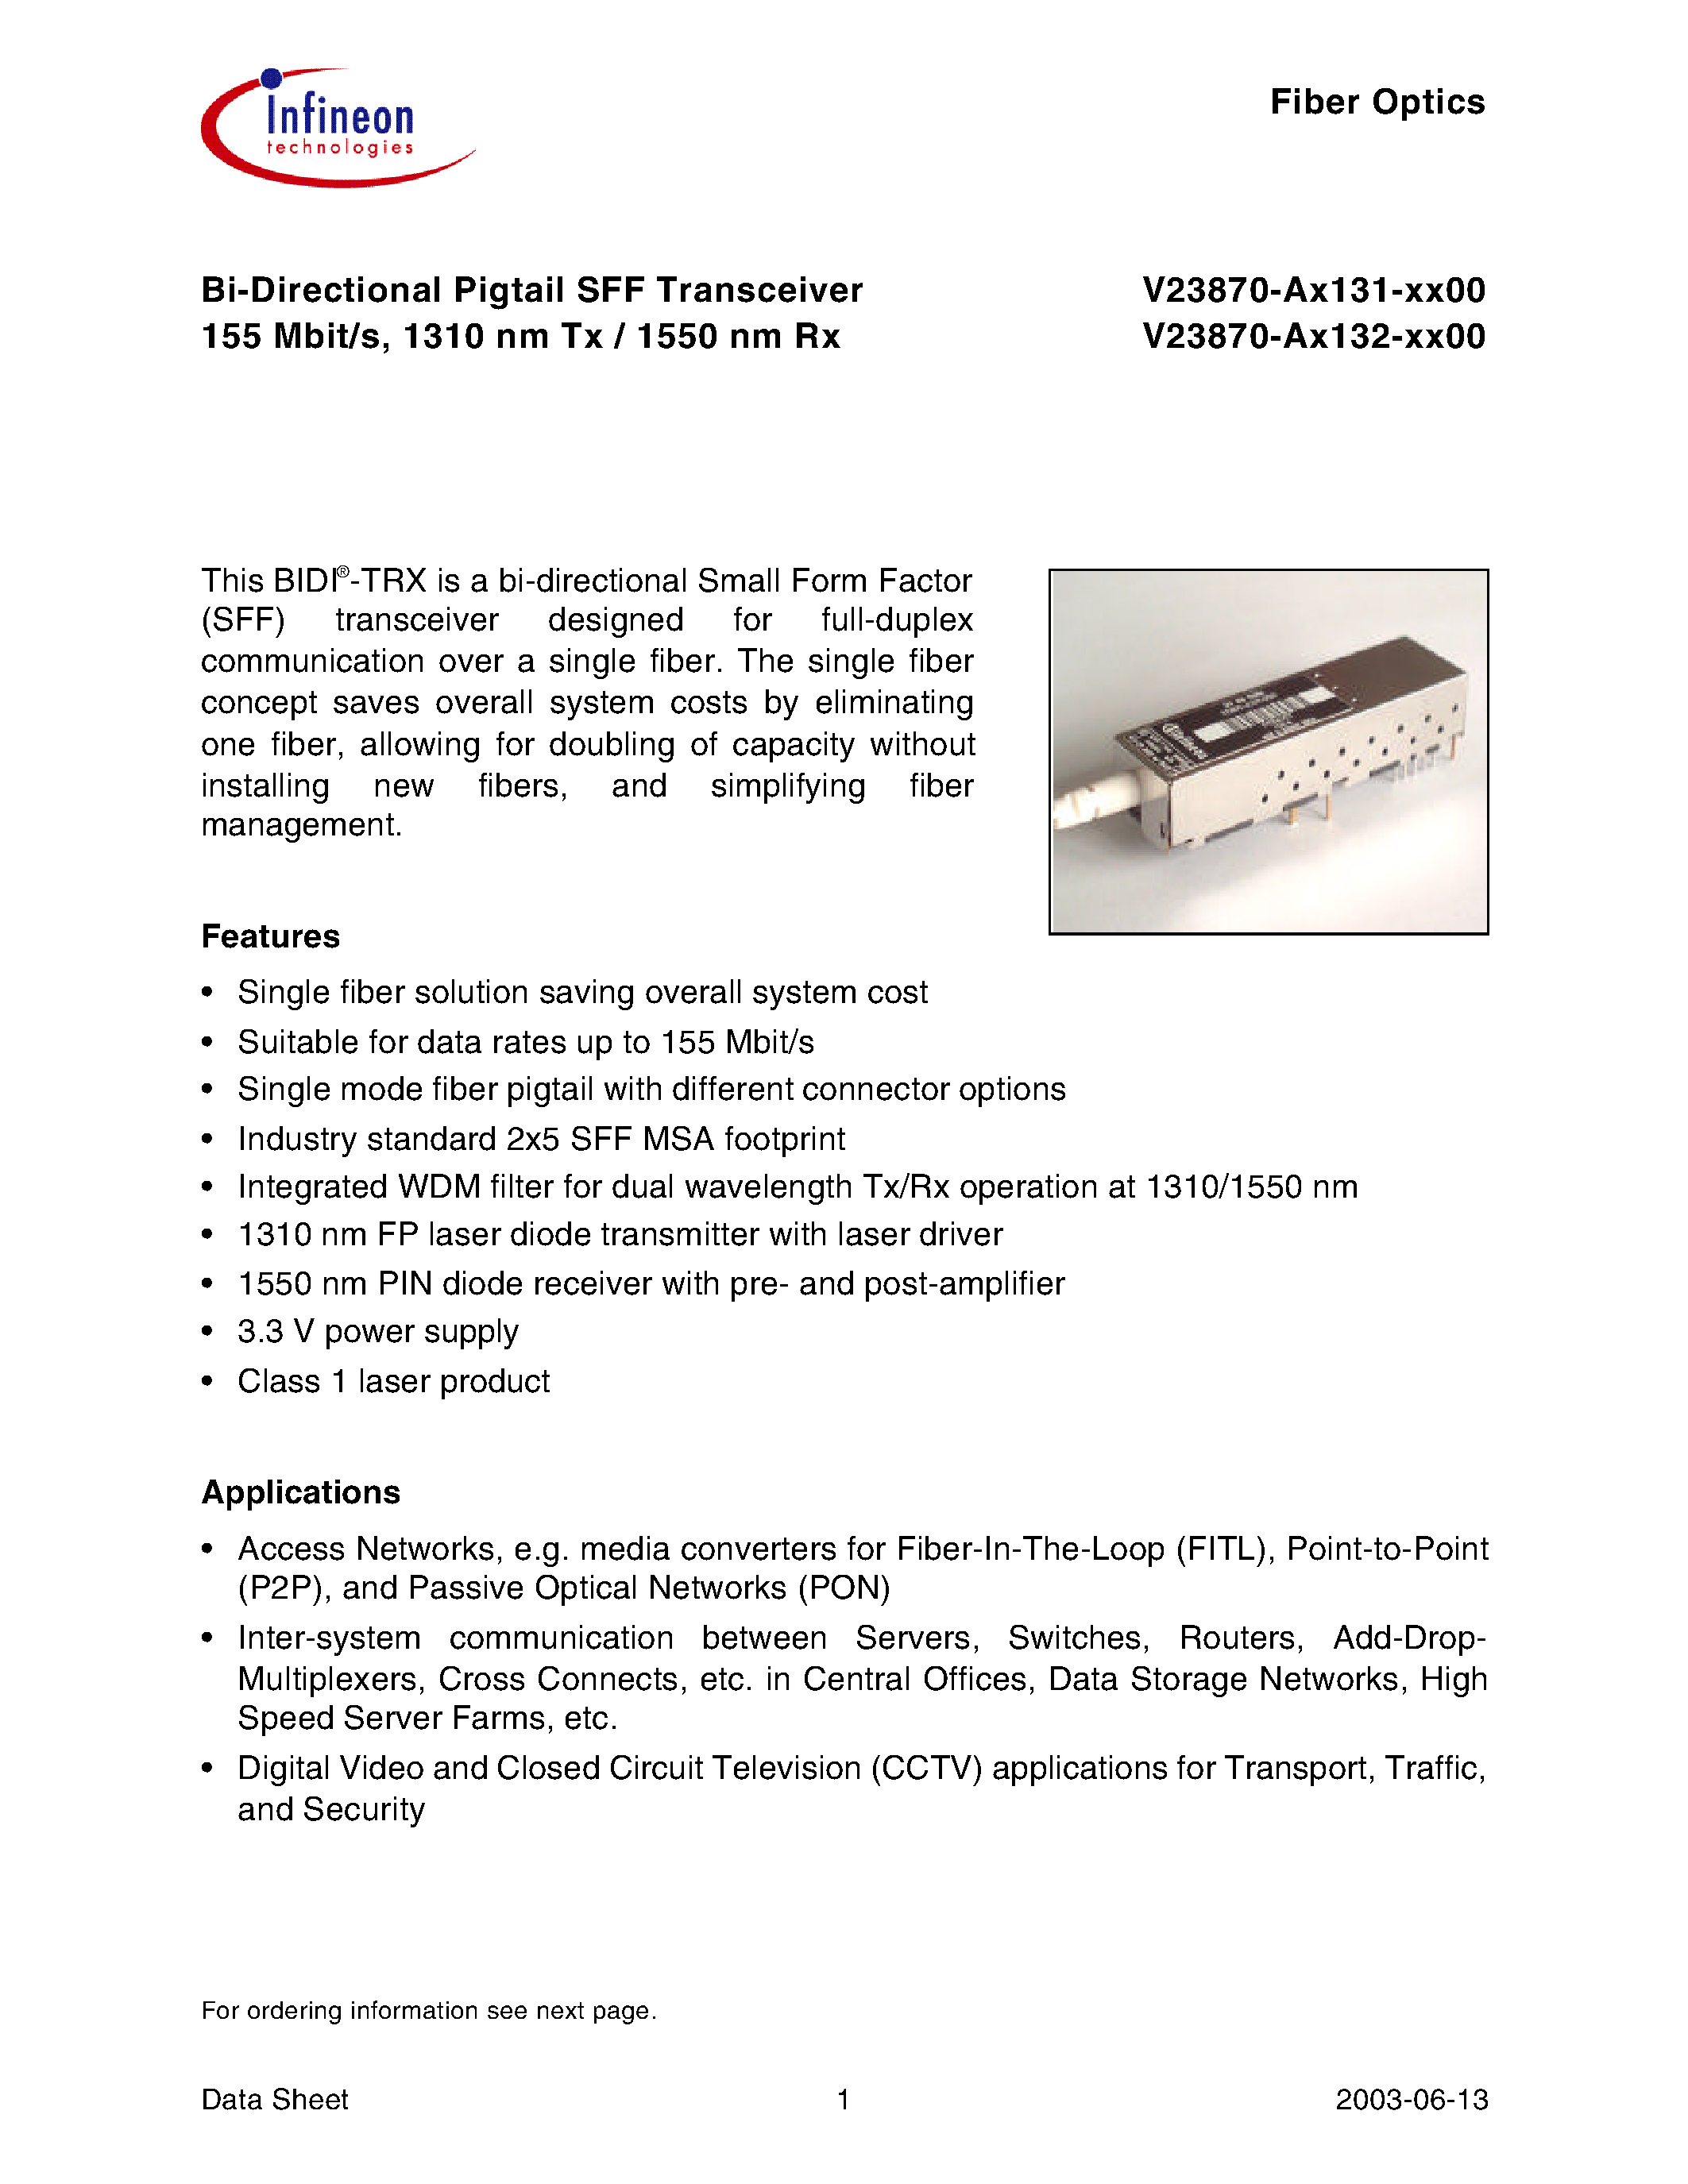 Datasheet V23870-A3132-F200 - Bi-Directional Pigtail SFF Transceiver 155 Mbit/s/ 1310 nm Tx / 1550 nm Rx page 1